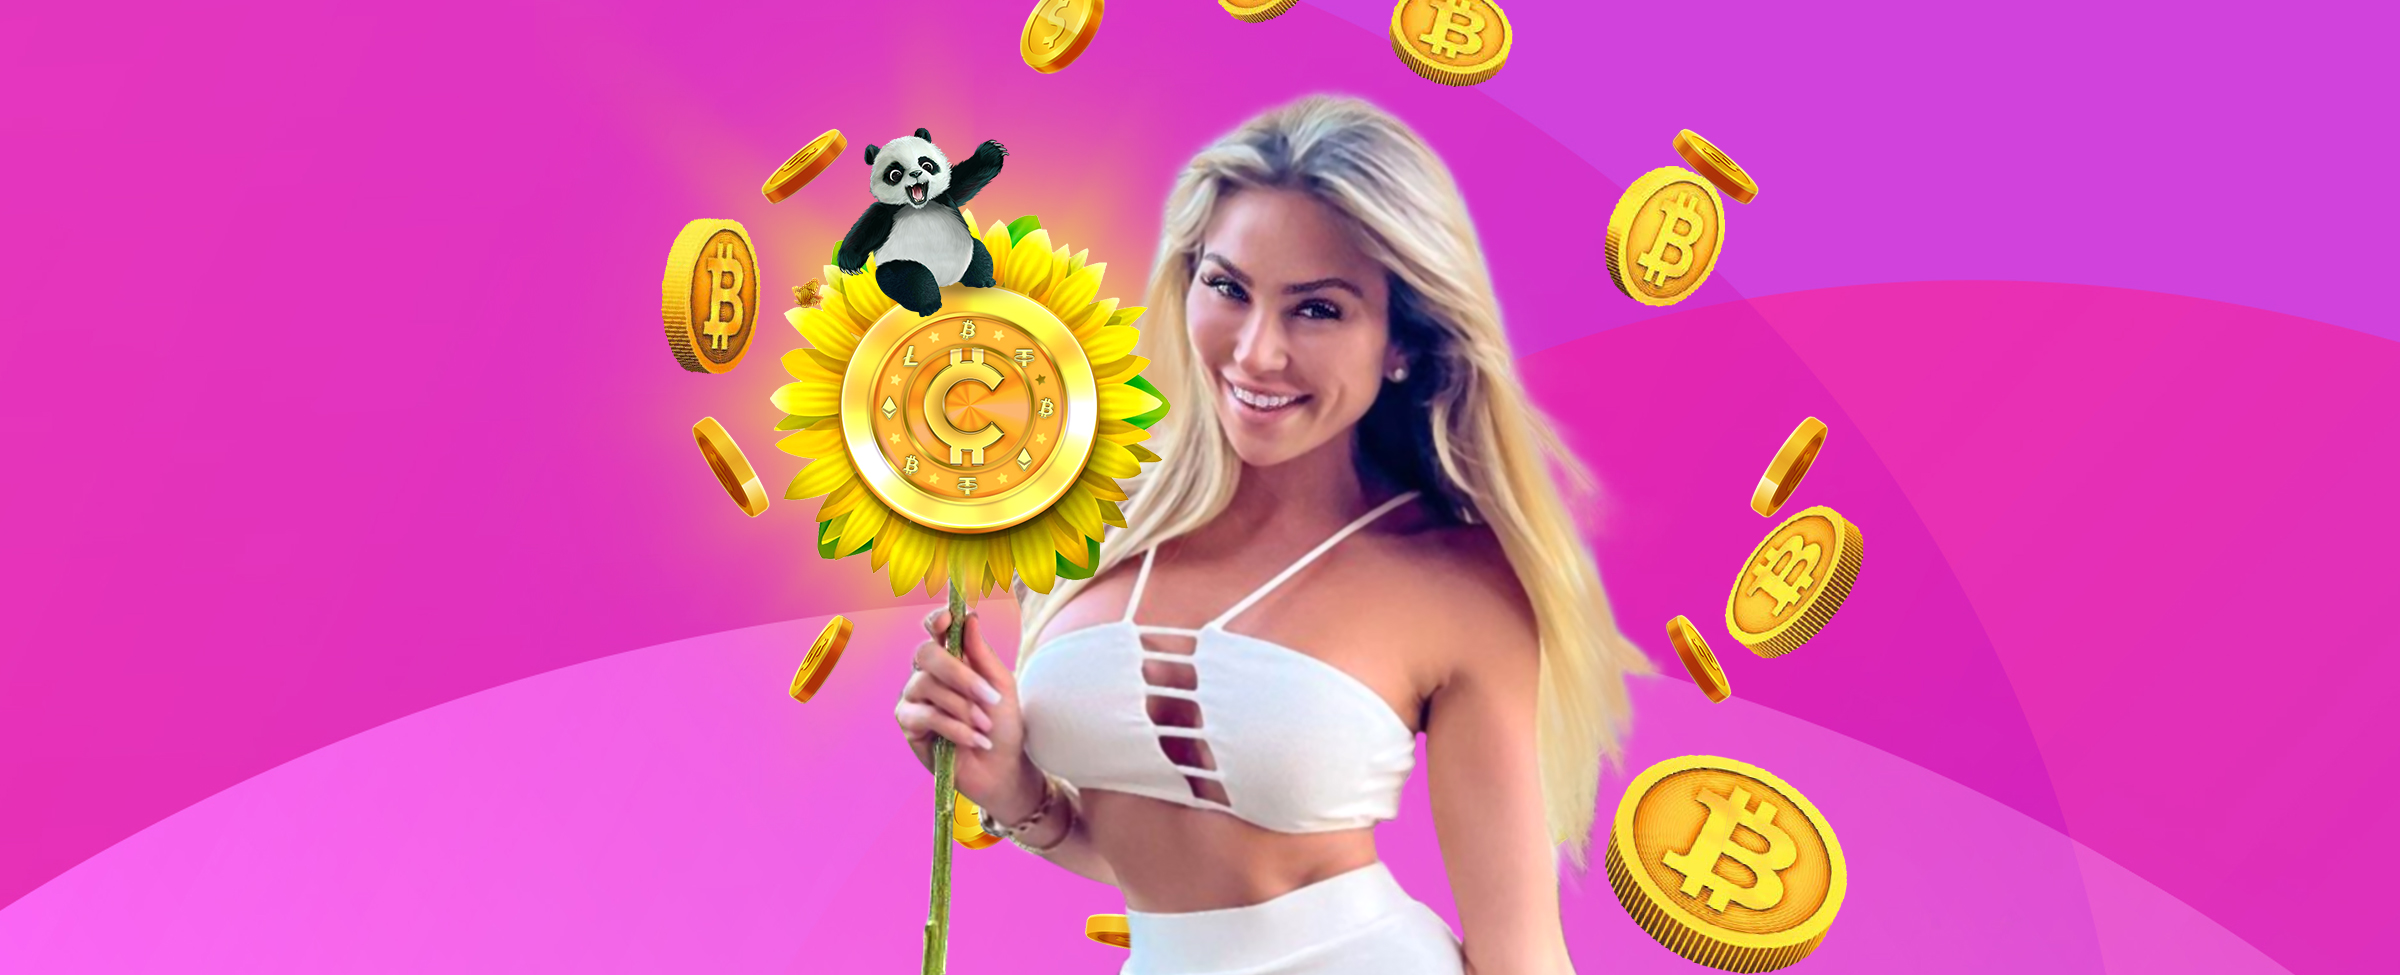 Crypto Queen Khloe Terae stands smiling and holding a sunflower with a crypto casino coin in the center, while the panda from Panda Pursuit slot game sits on top, as Bitcoins float around her